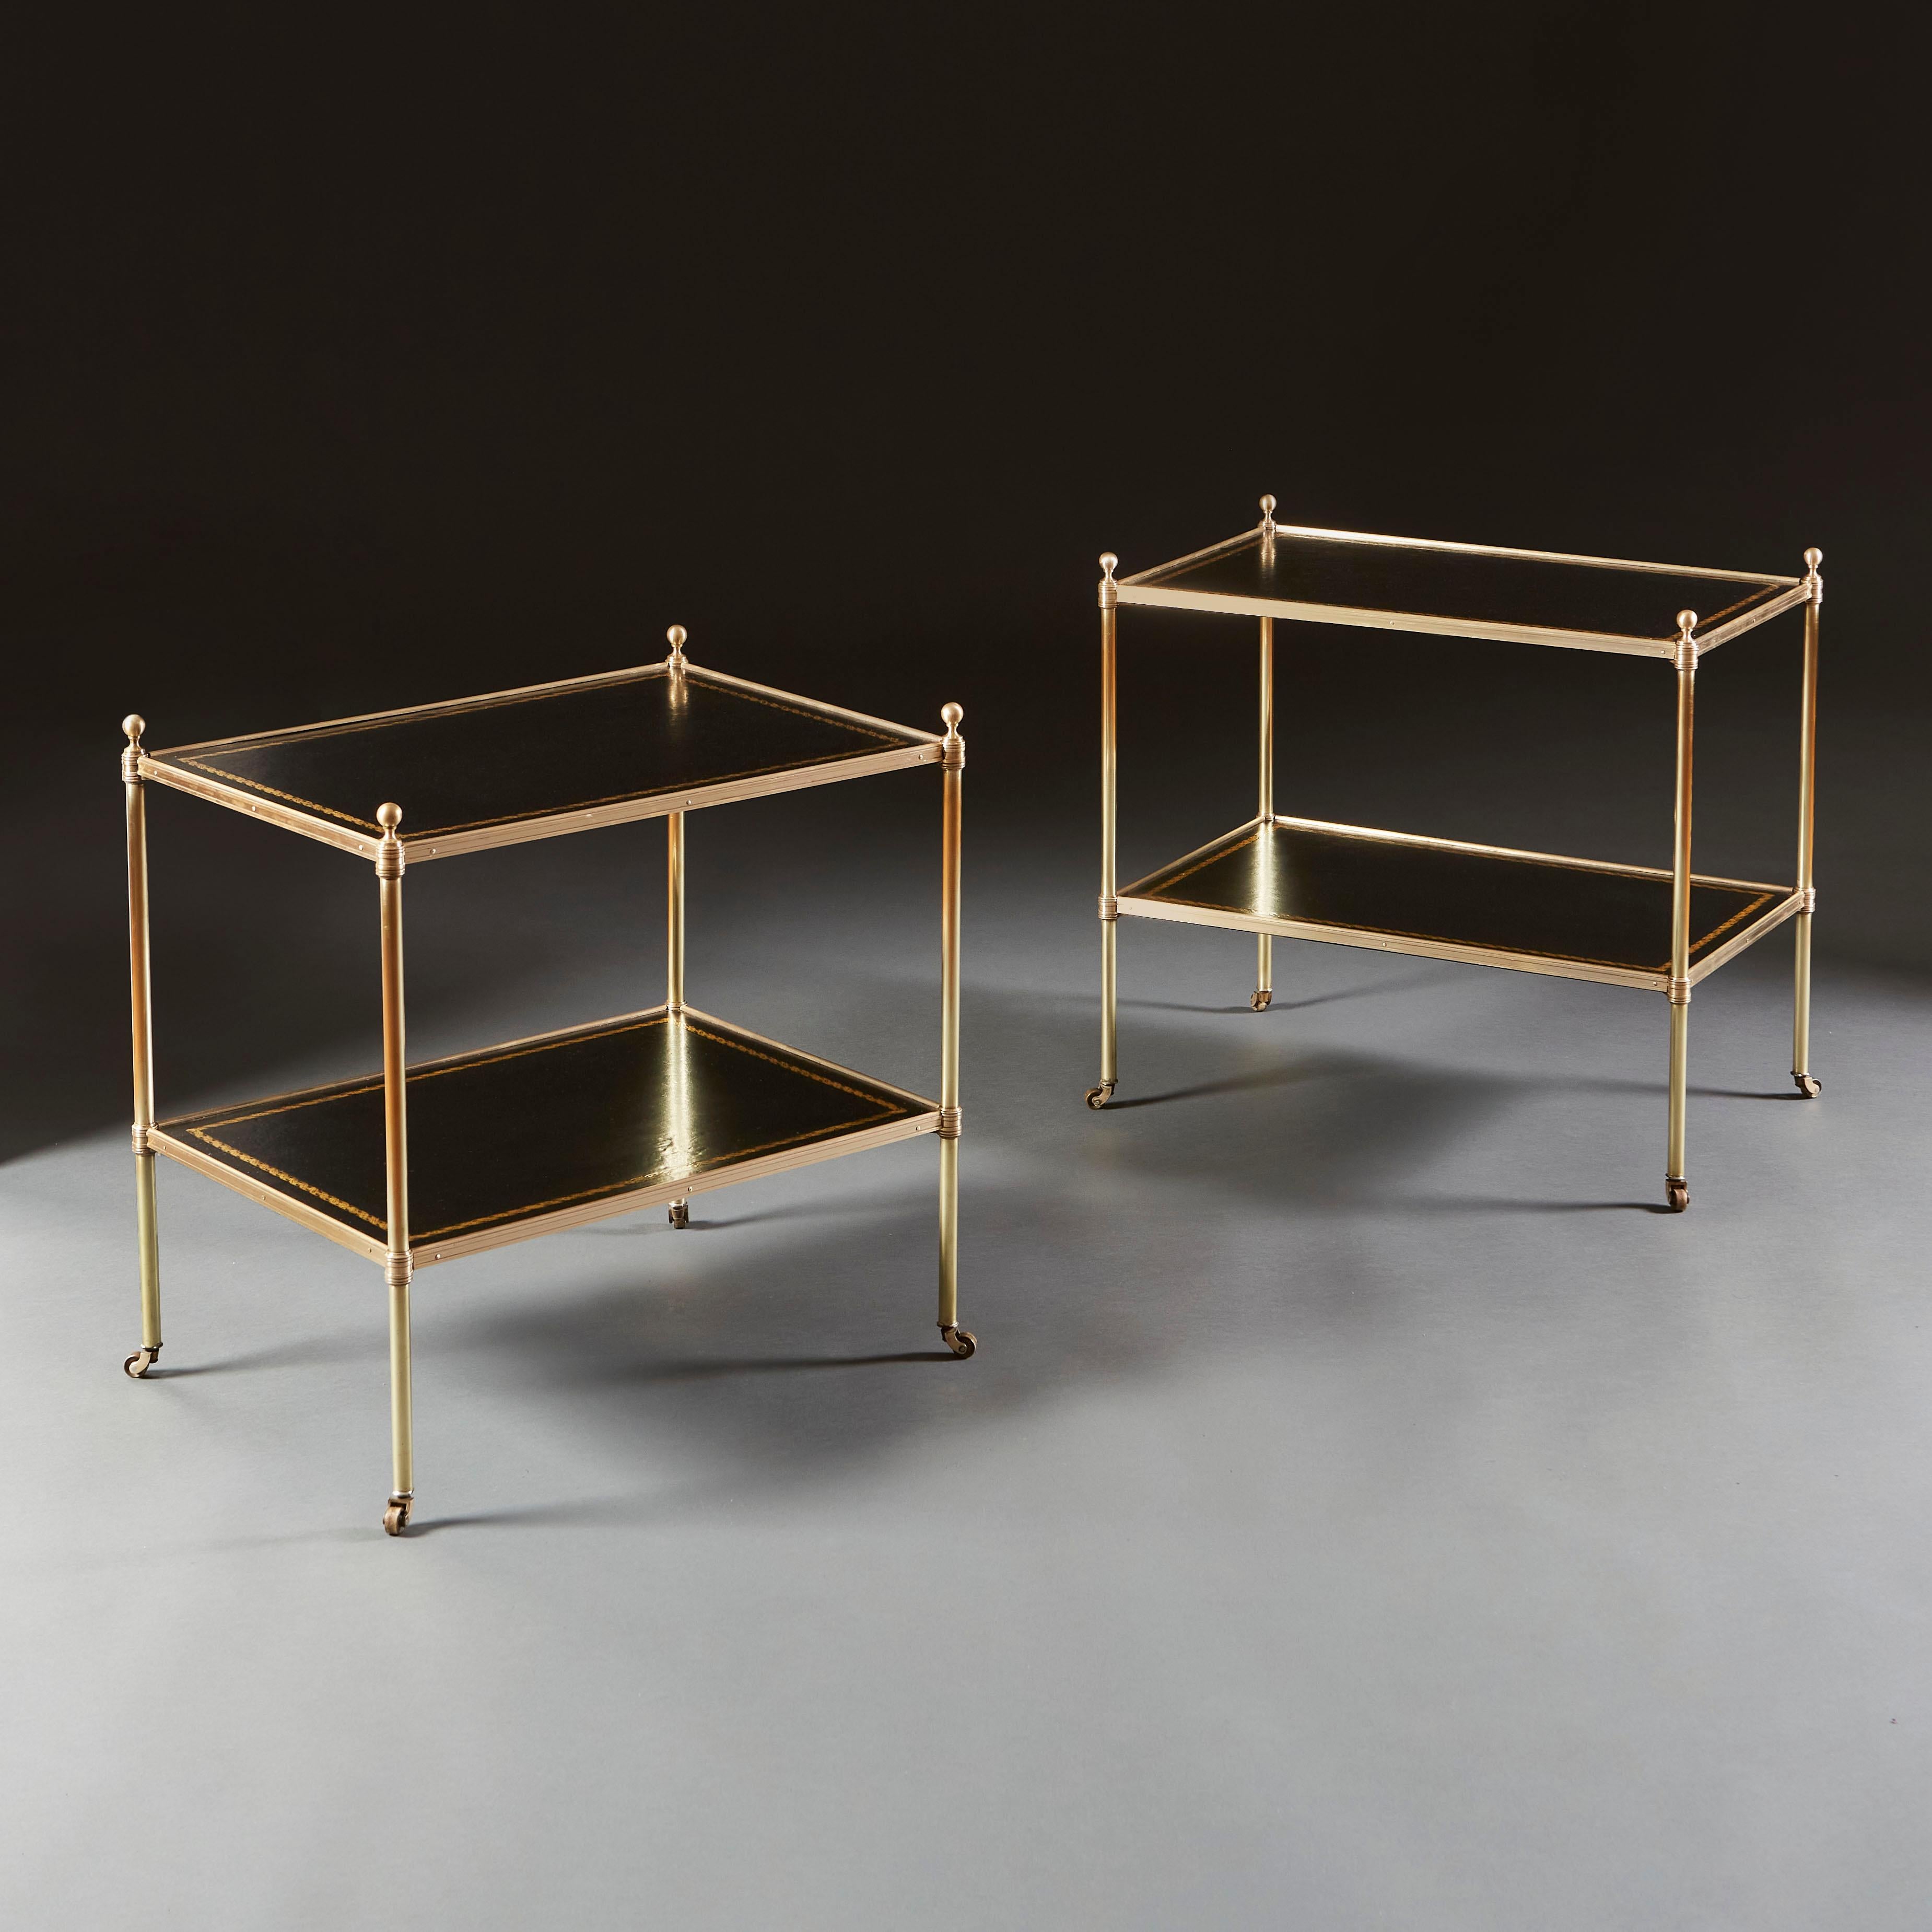 A pair of early twentieth century two tier etageres with black leather tops with gilt tooling. Of slightly differing size, please see dimensions below for measurements of each etagere.

Dimensions of smaller:
Height 55.00cm
Width 56.00cm
Depth